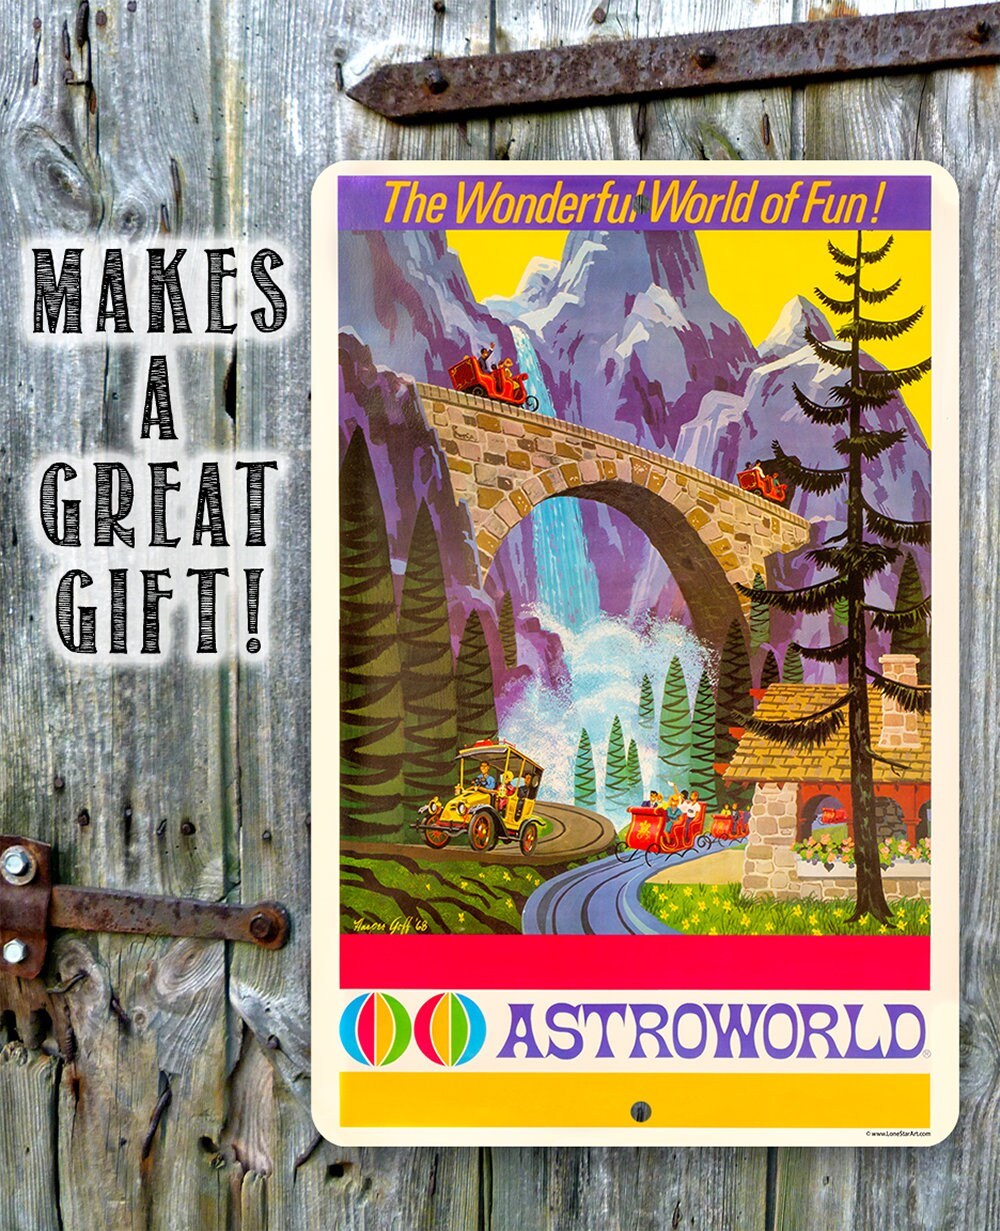 Tin - Metal Sign - AstroWorld Alpine Sleigh Ride - 8"x12" or 12"x 18" Use Indoor/Outdoor - Gift for Amusement Park Enthusiasts Lone Star Art 